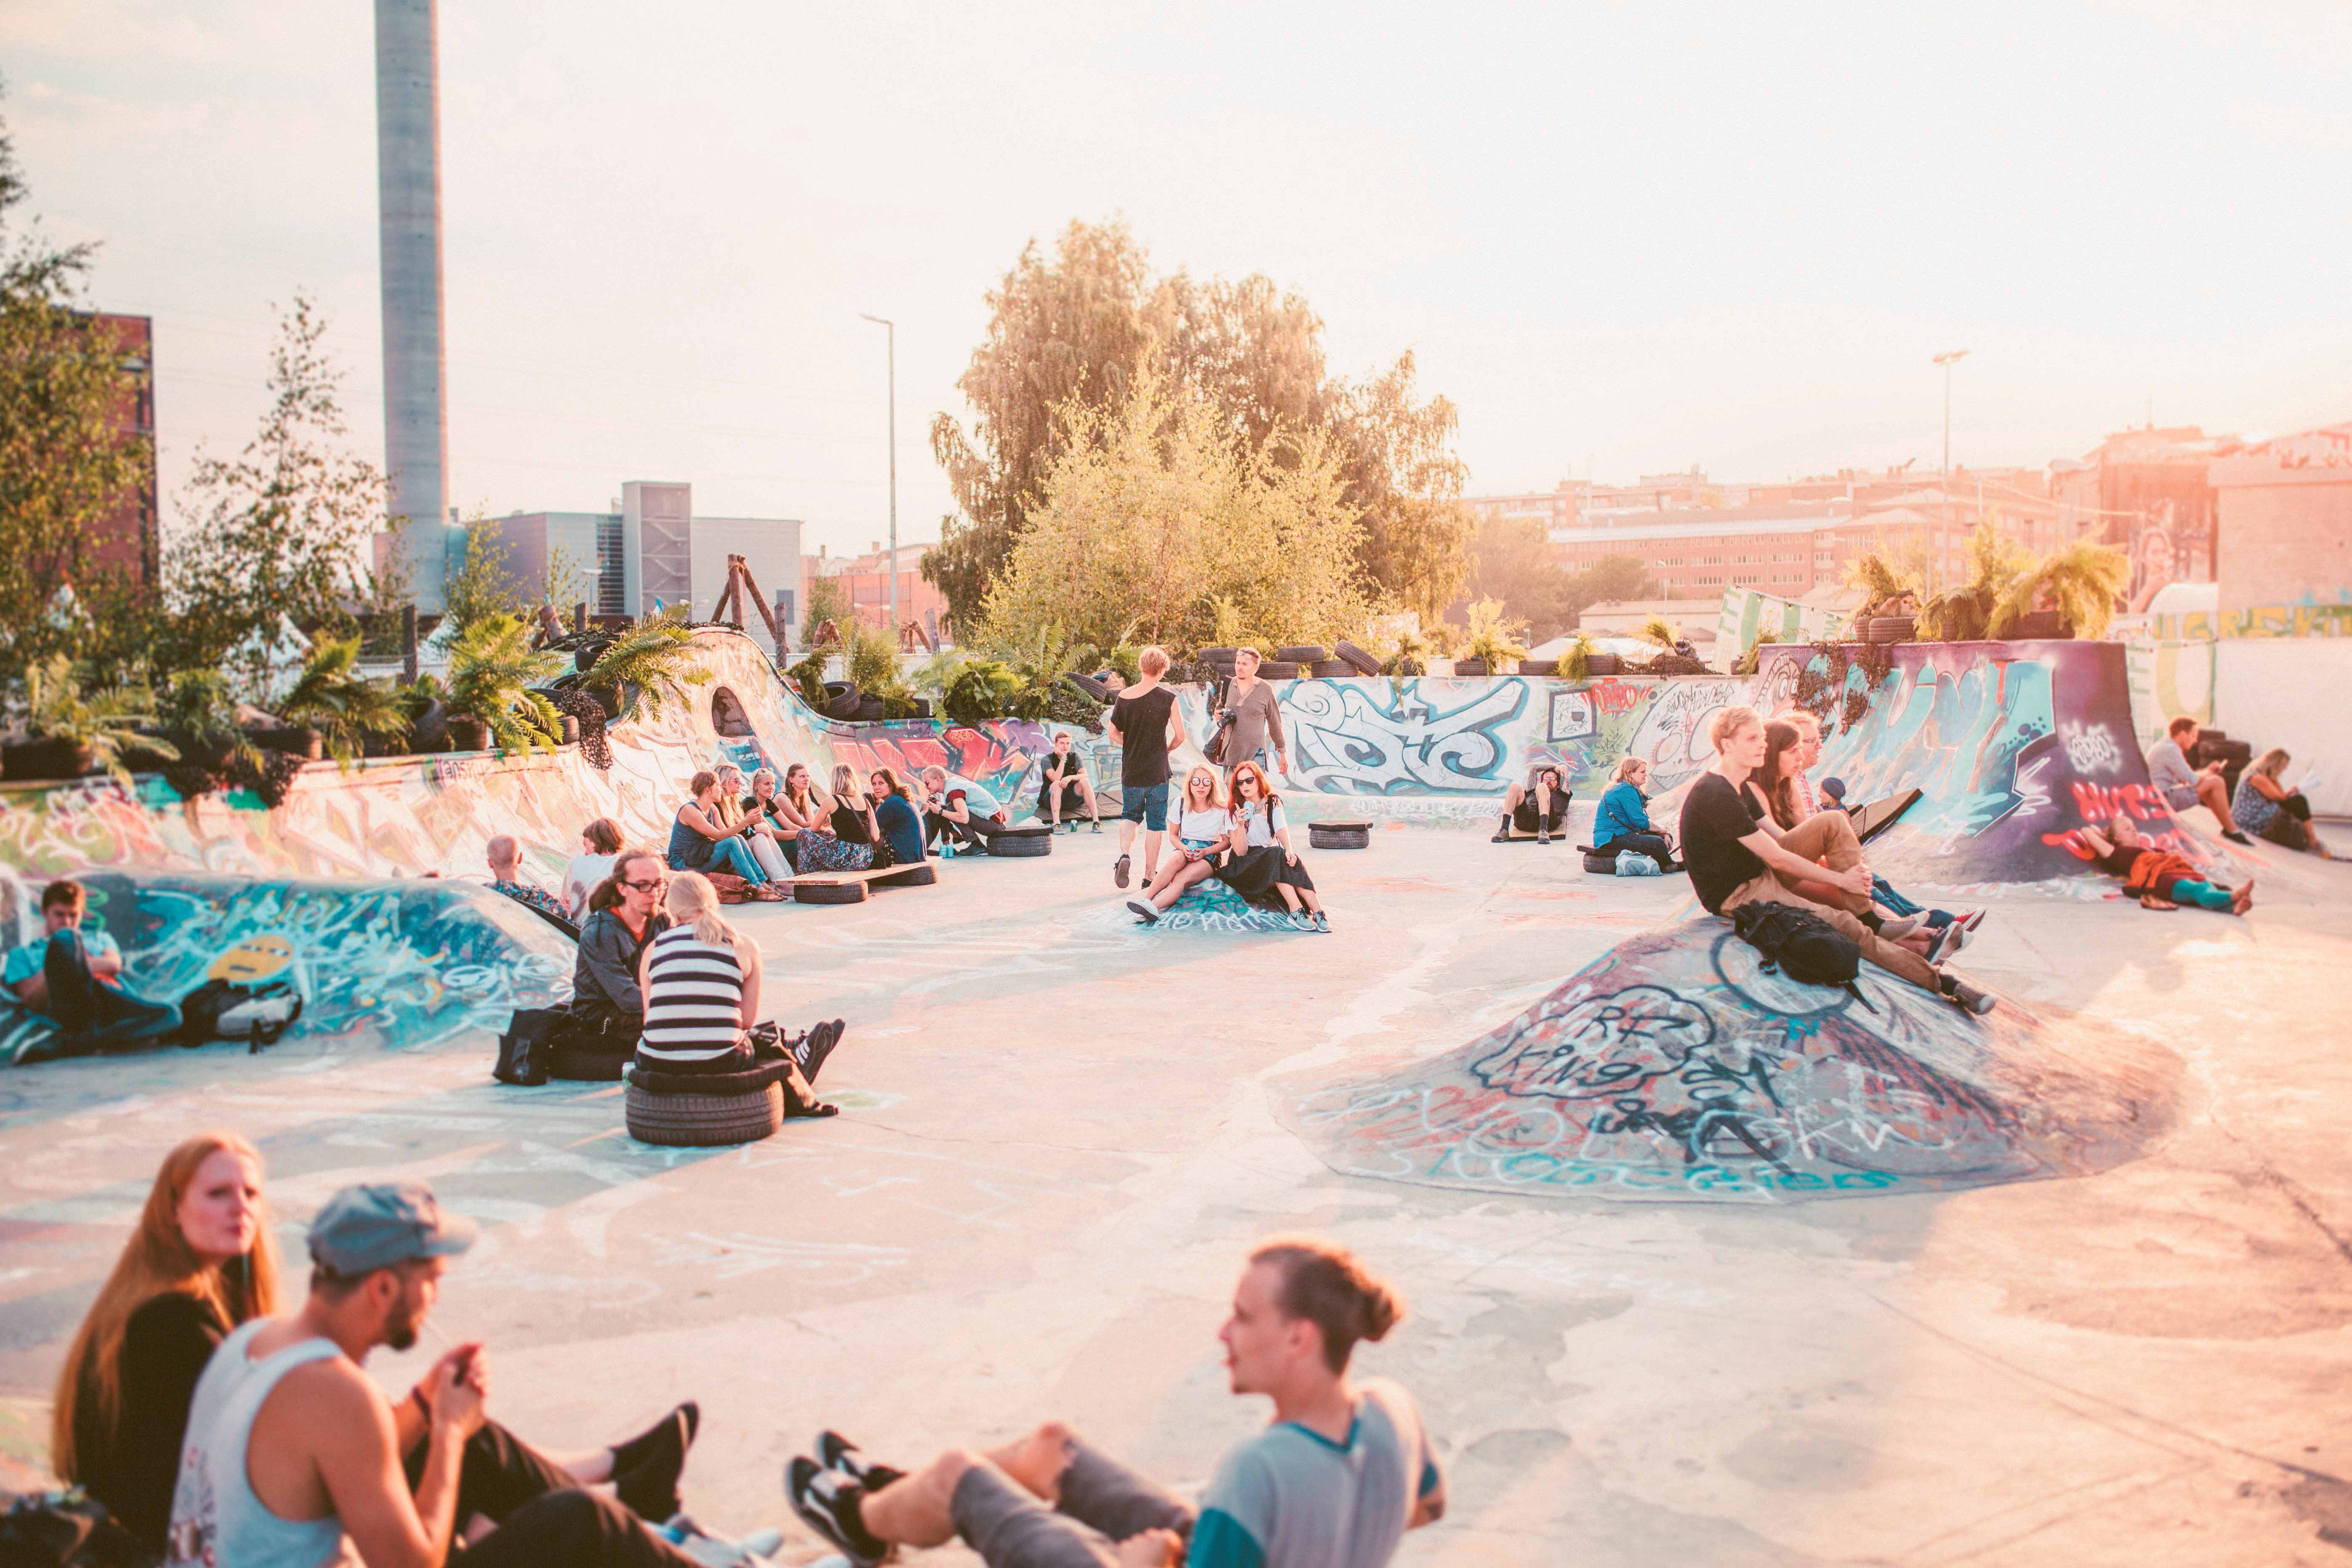 People gathered to a skate park to enjoy the Finnish summer